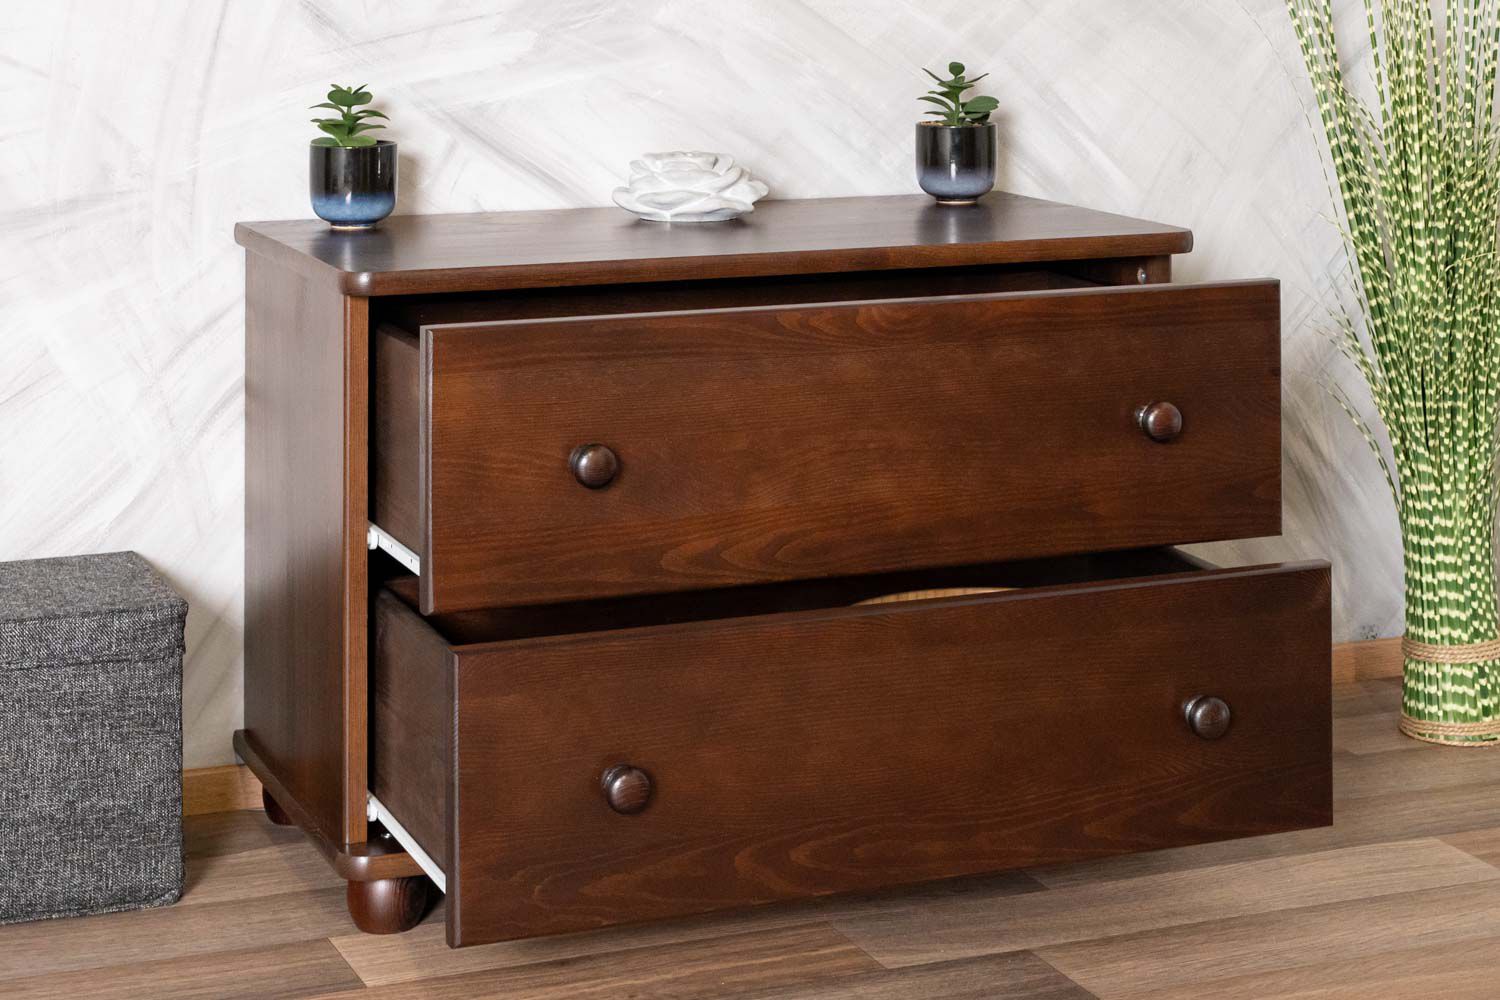 Low modern chest of drawers Junco 152, solid pine wood, walnut color, 55 x 80 x 42 cm, wide bedside chest with 2 drawers, durable and spacious